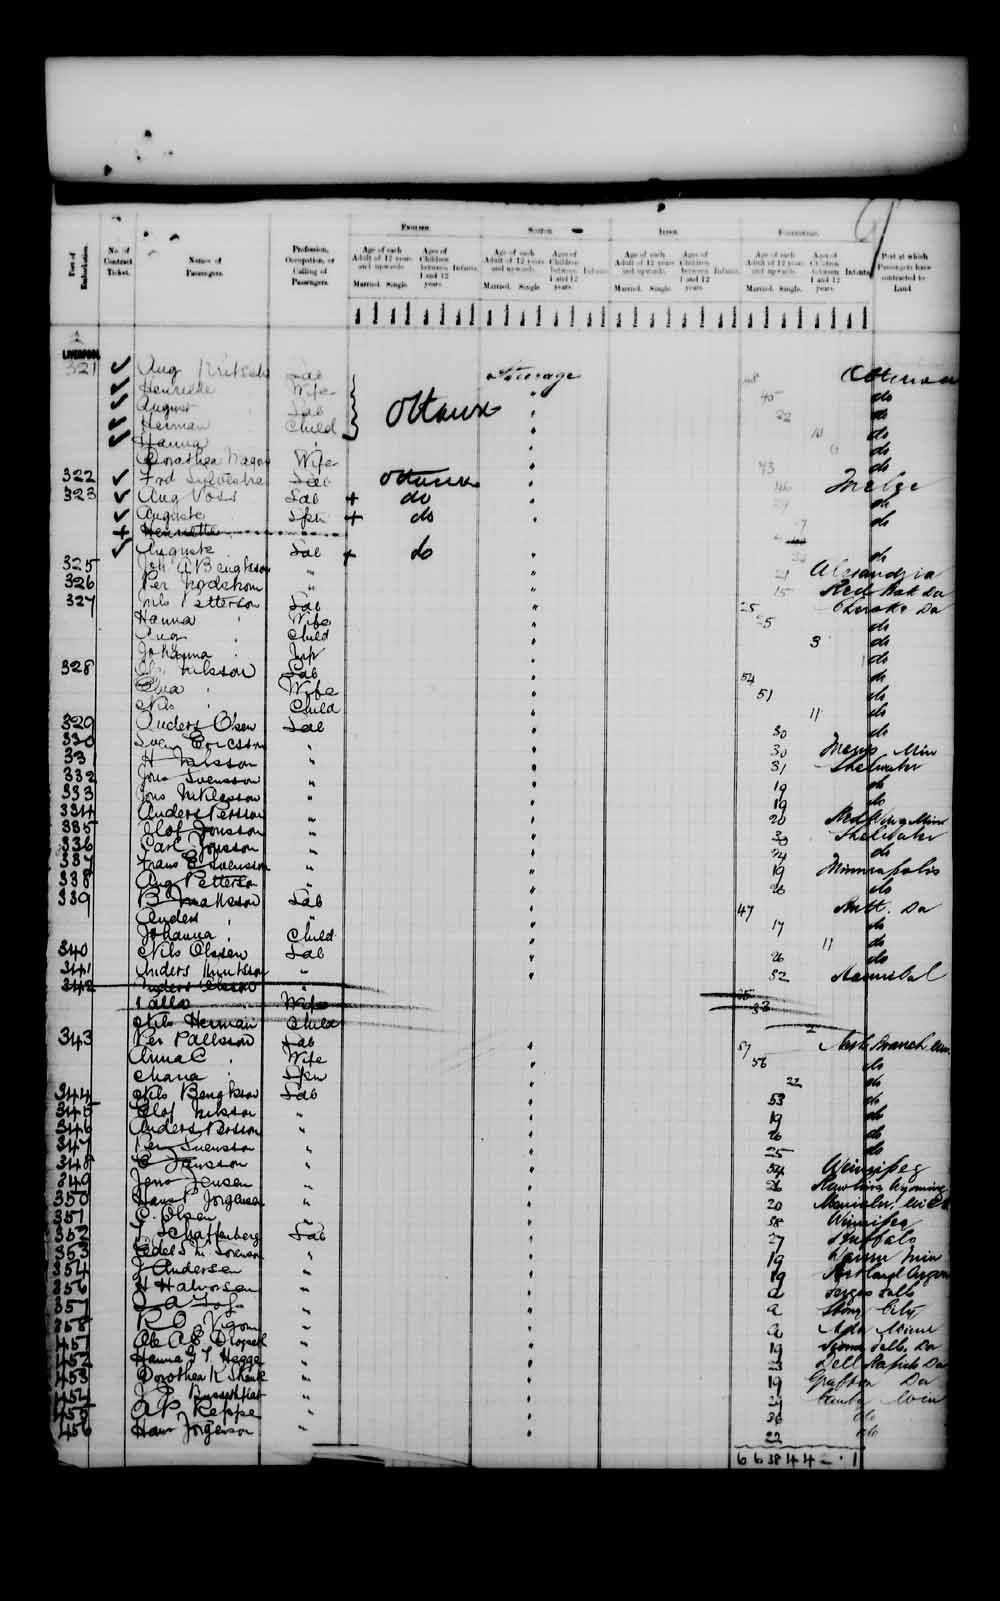 Digitized page of Passenger Lists for Image No.: e003542779